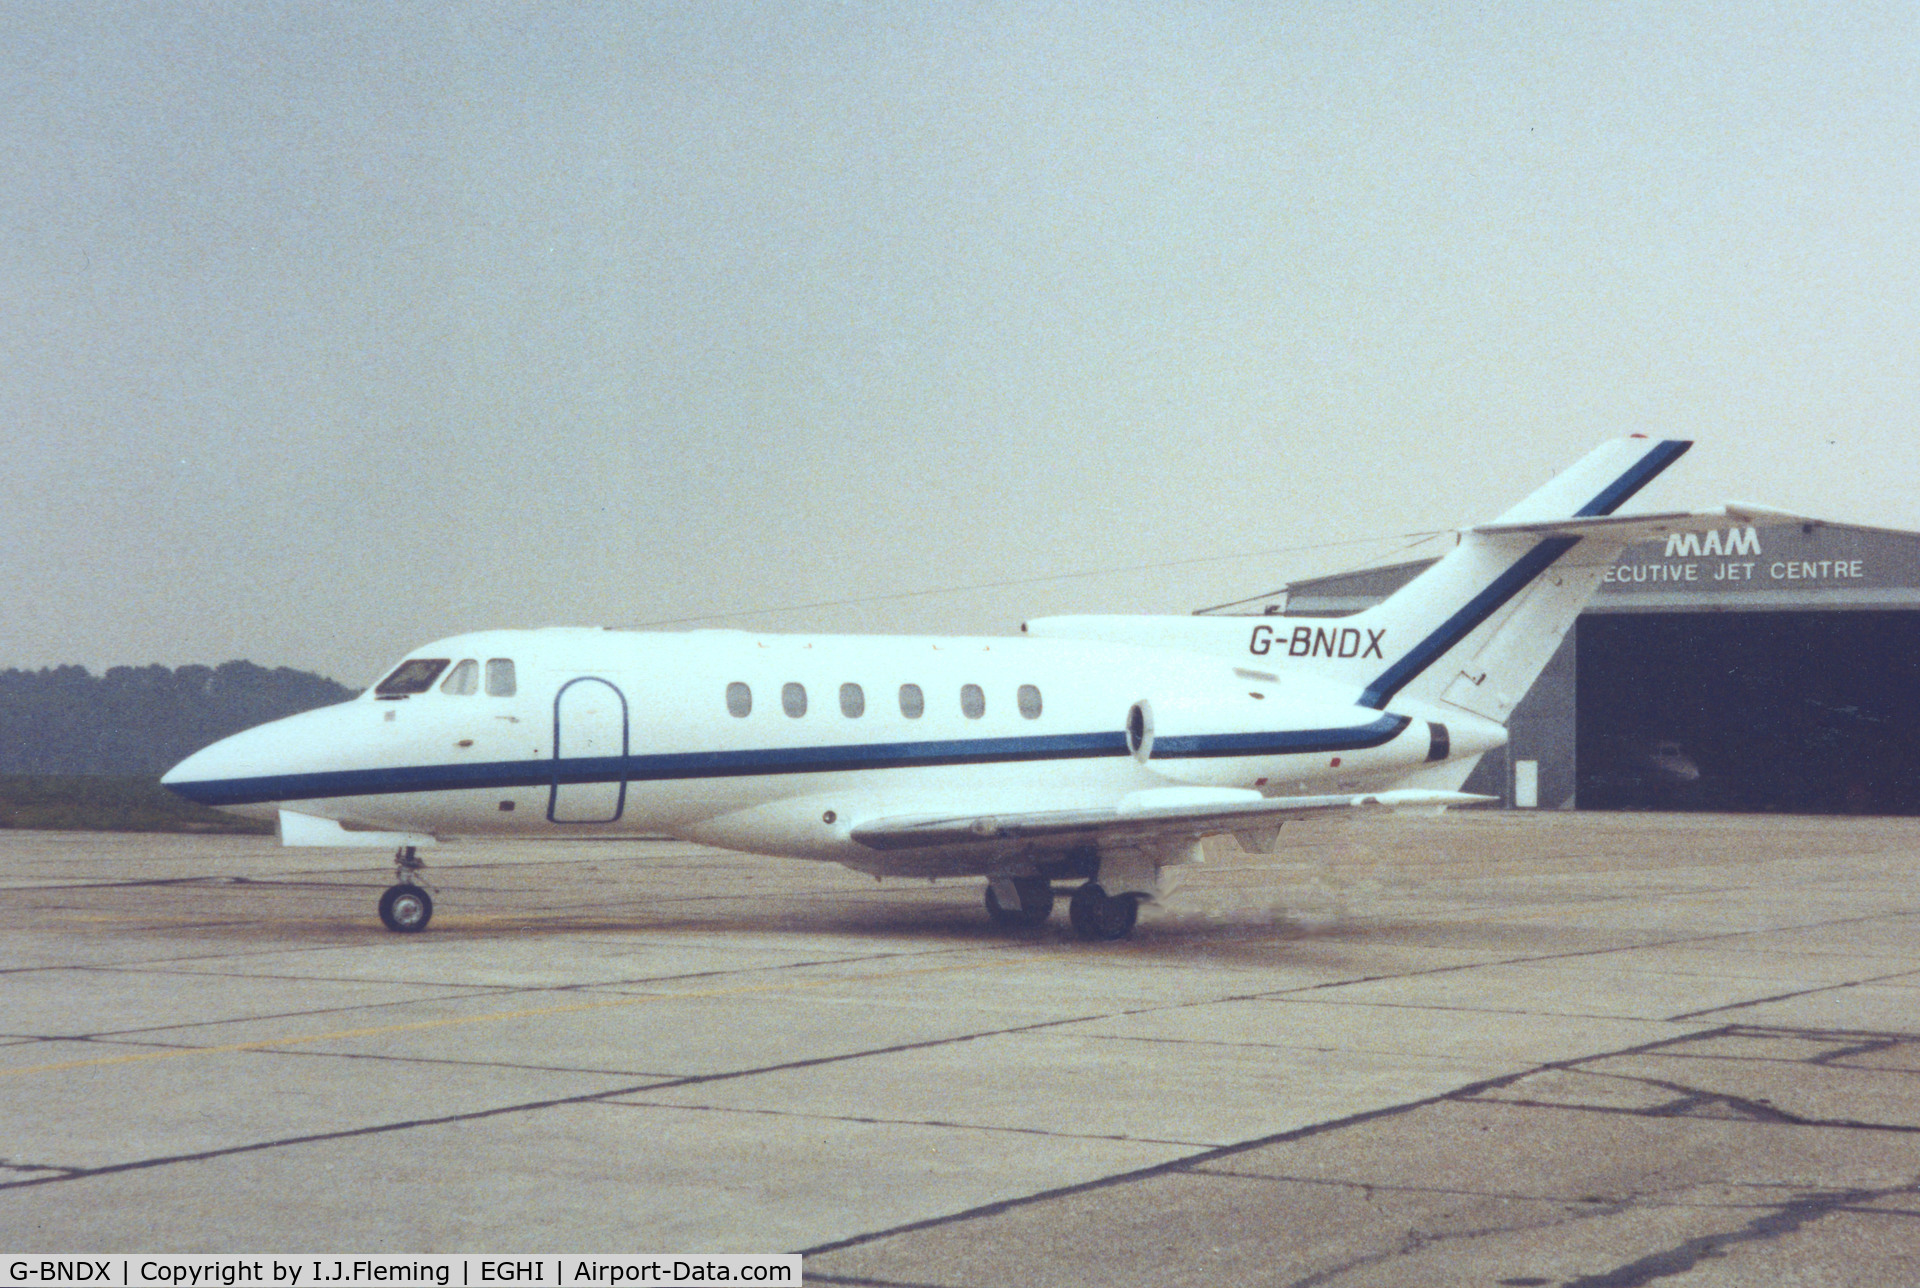 G-BNDX, 1973 Hawker Siddeley HS.125 Series 600B C/N 256012, At Southampton airport, after registration, prior to flying to Jeddah to work for Bendix.